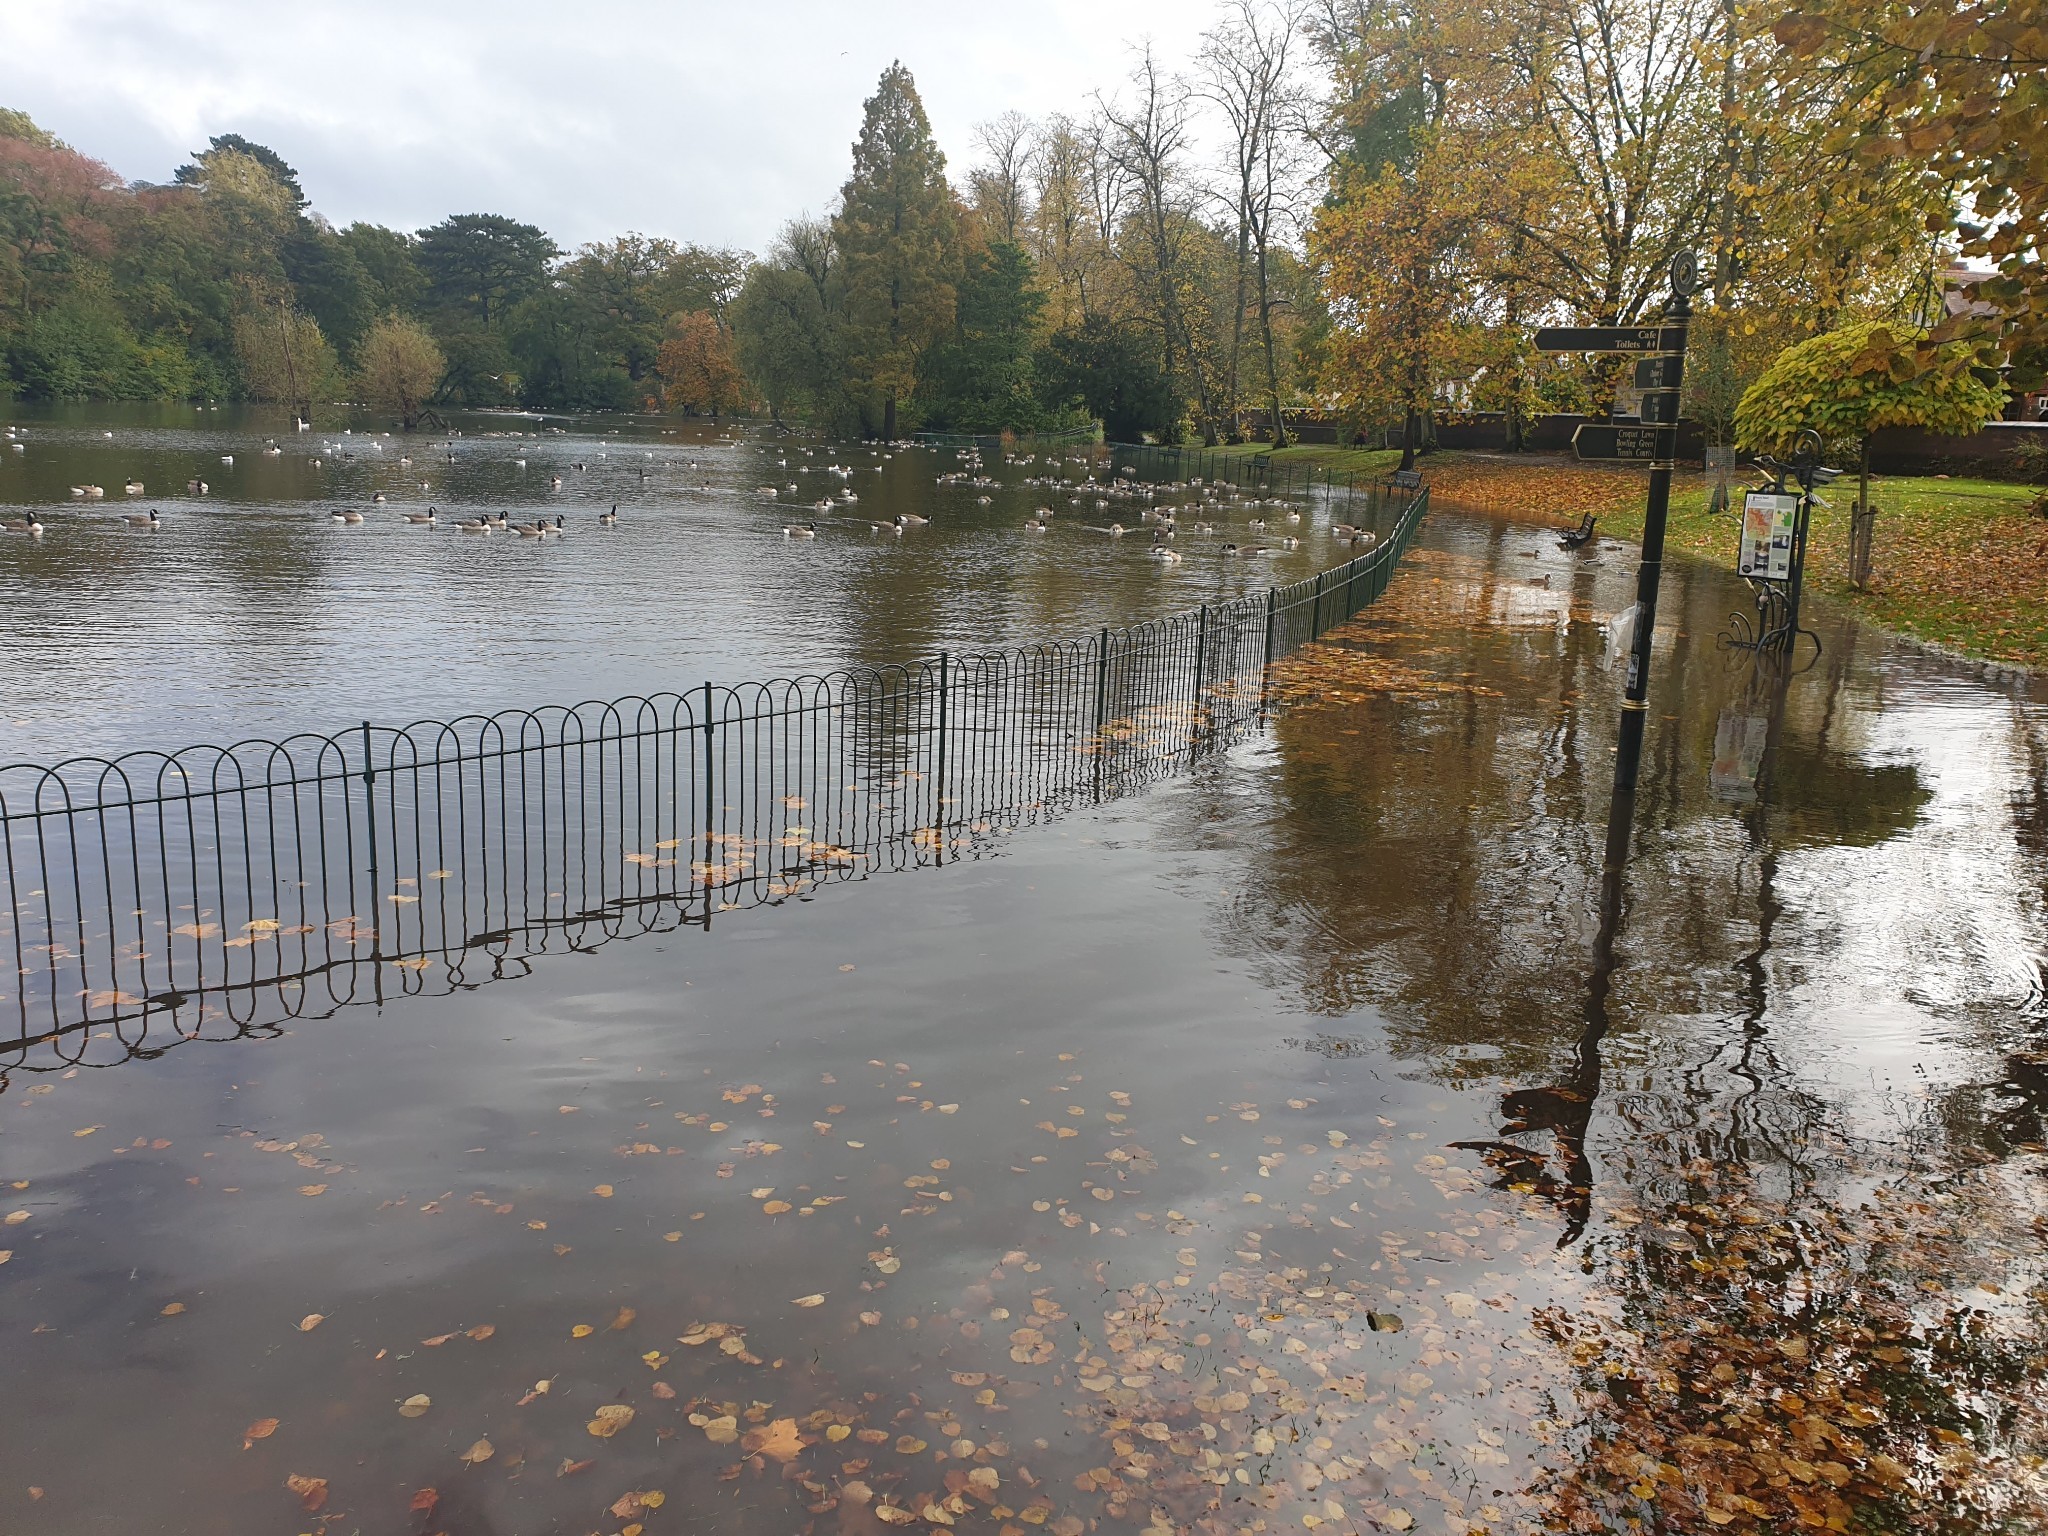 The flooding in Mary Stevens Park, captured on camera by Danielle Stockdale